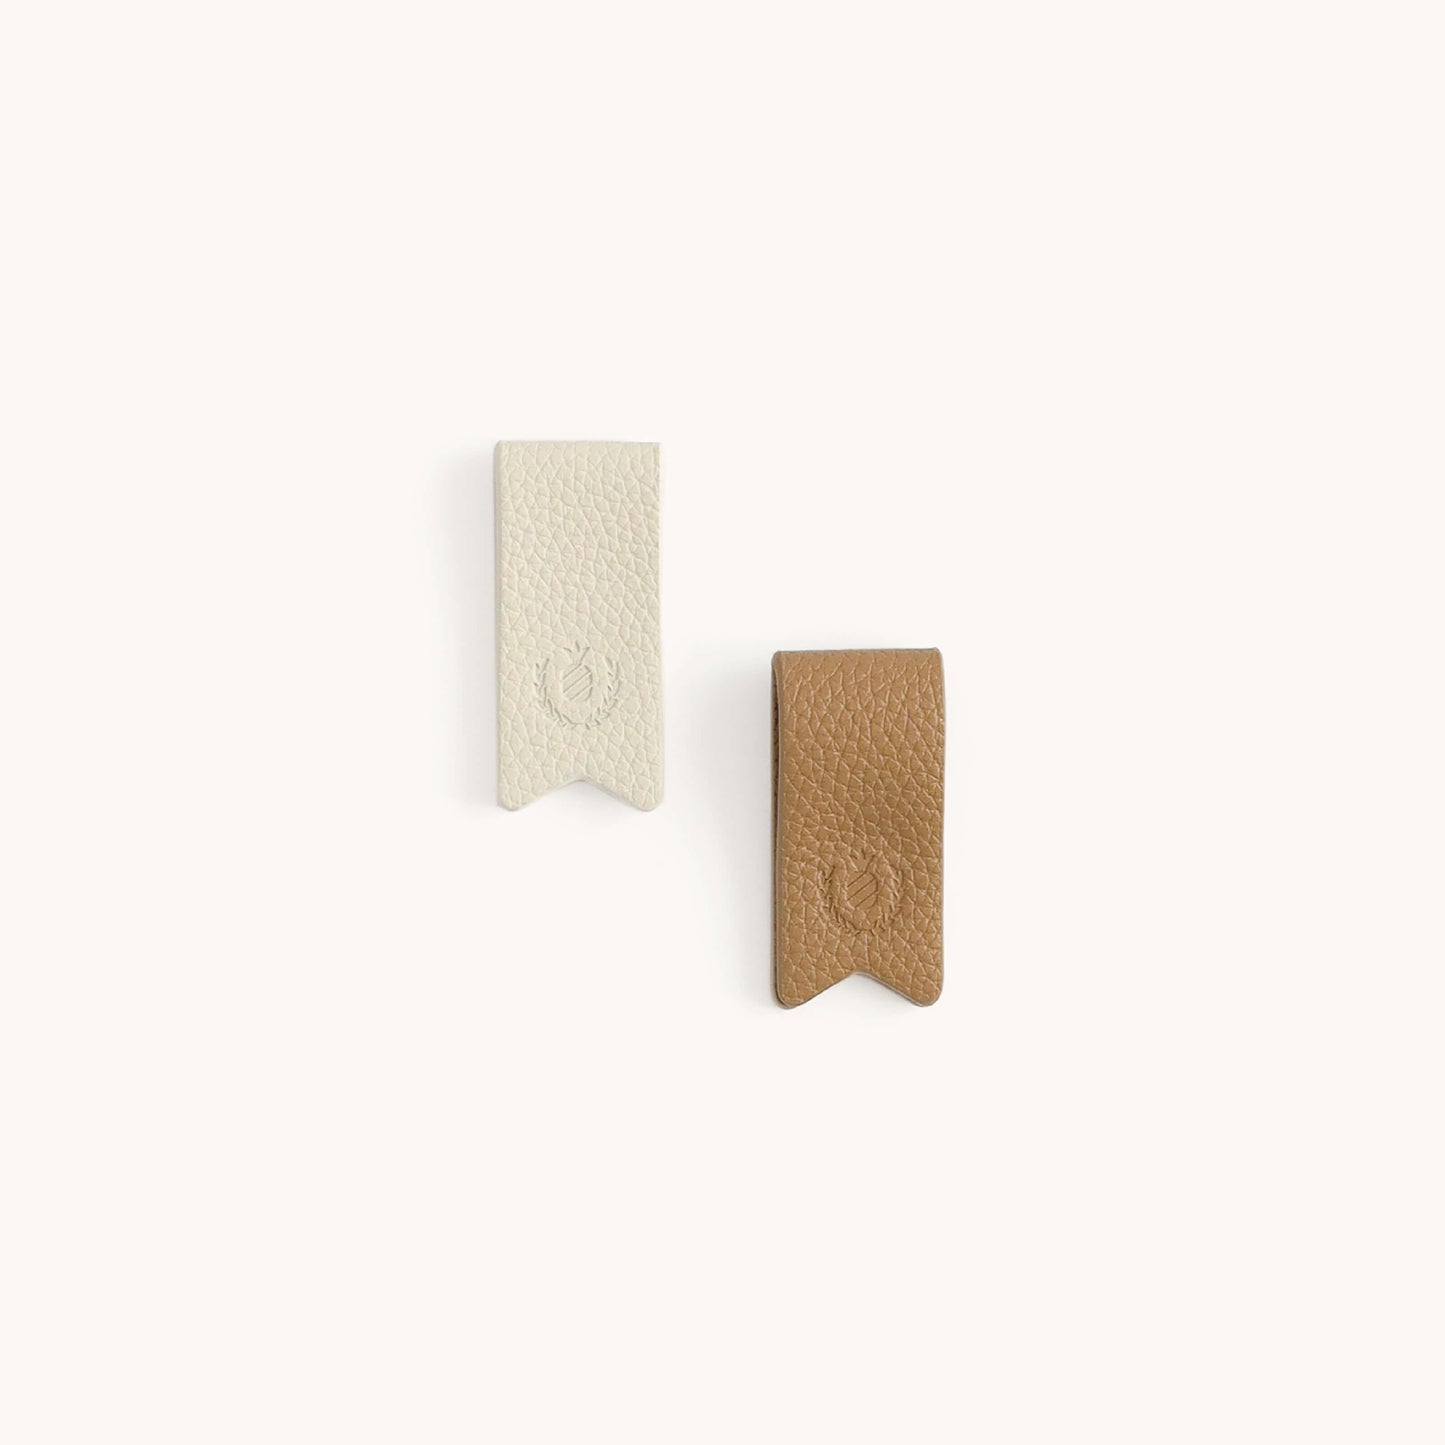 Ivory & Fawn Magnetic Cord Organizers